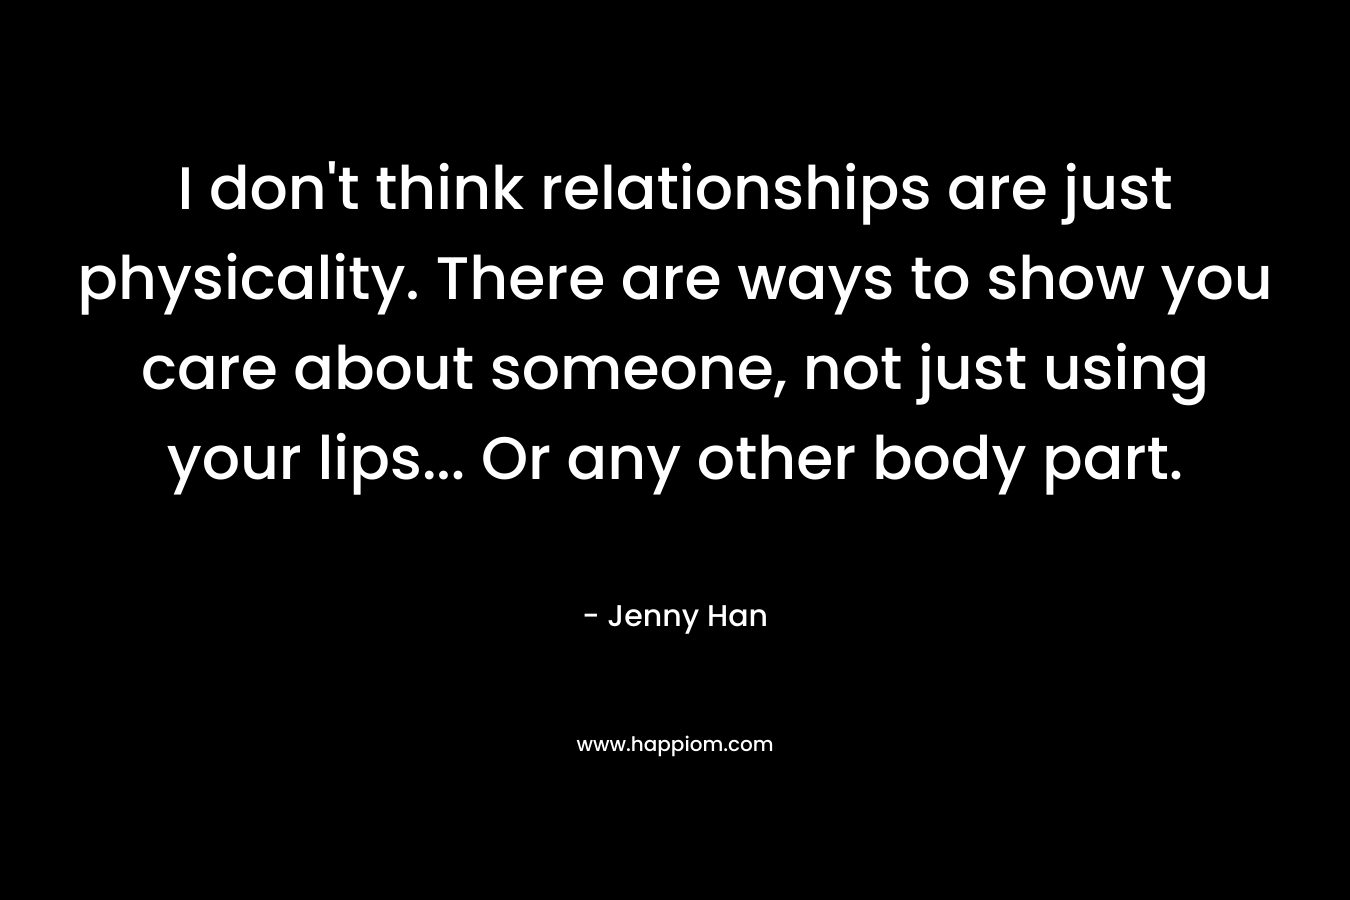 I don't think relationships are just physicality. There are ways to show you care about someone, not just using your lips... Or any other body part.